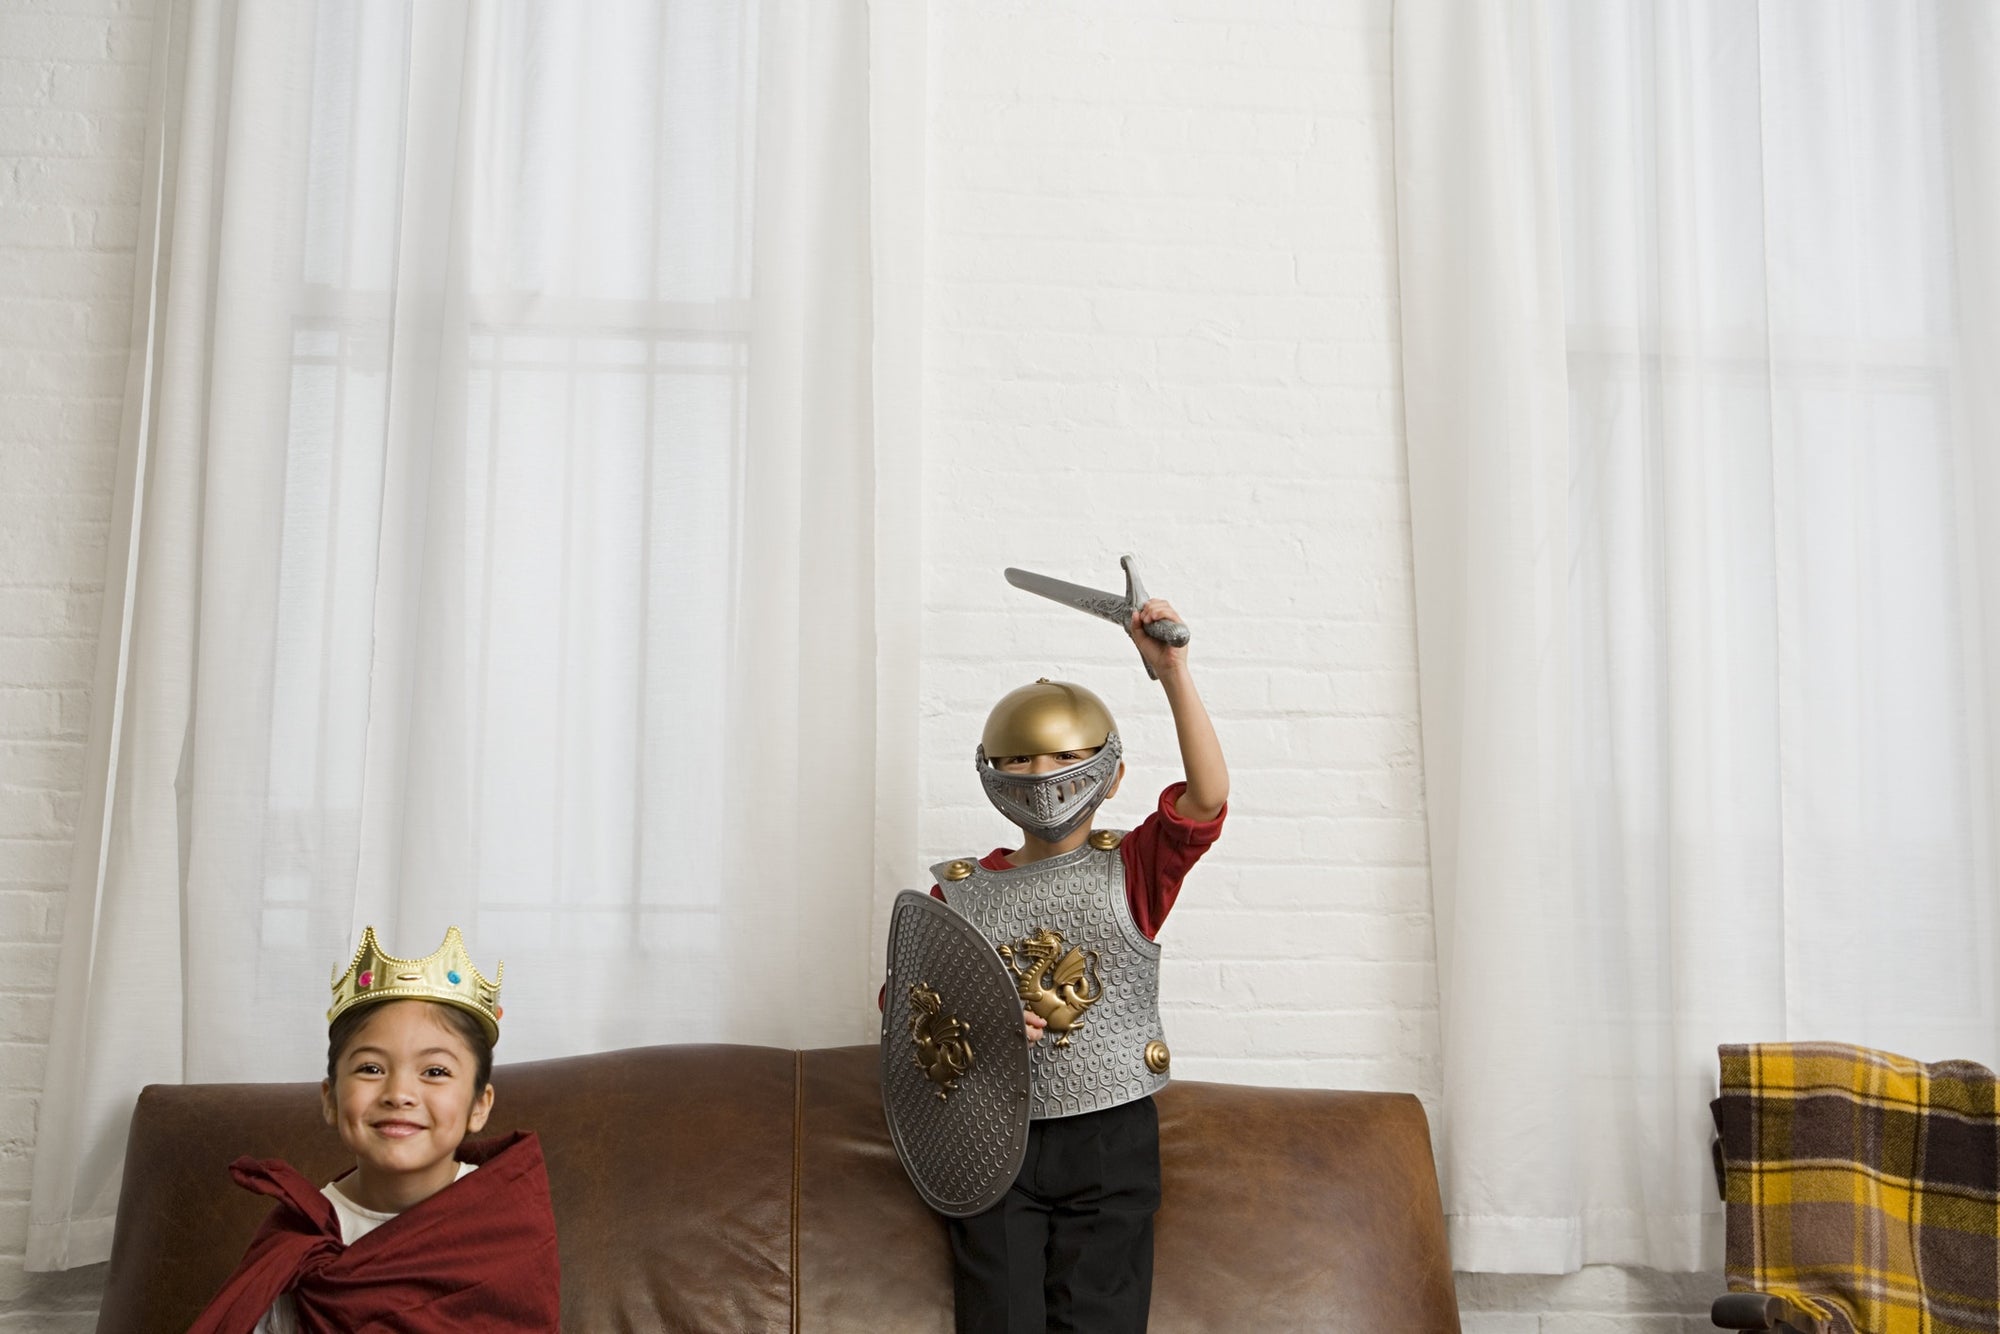 Boys in knight costume in living room